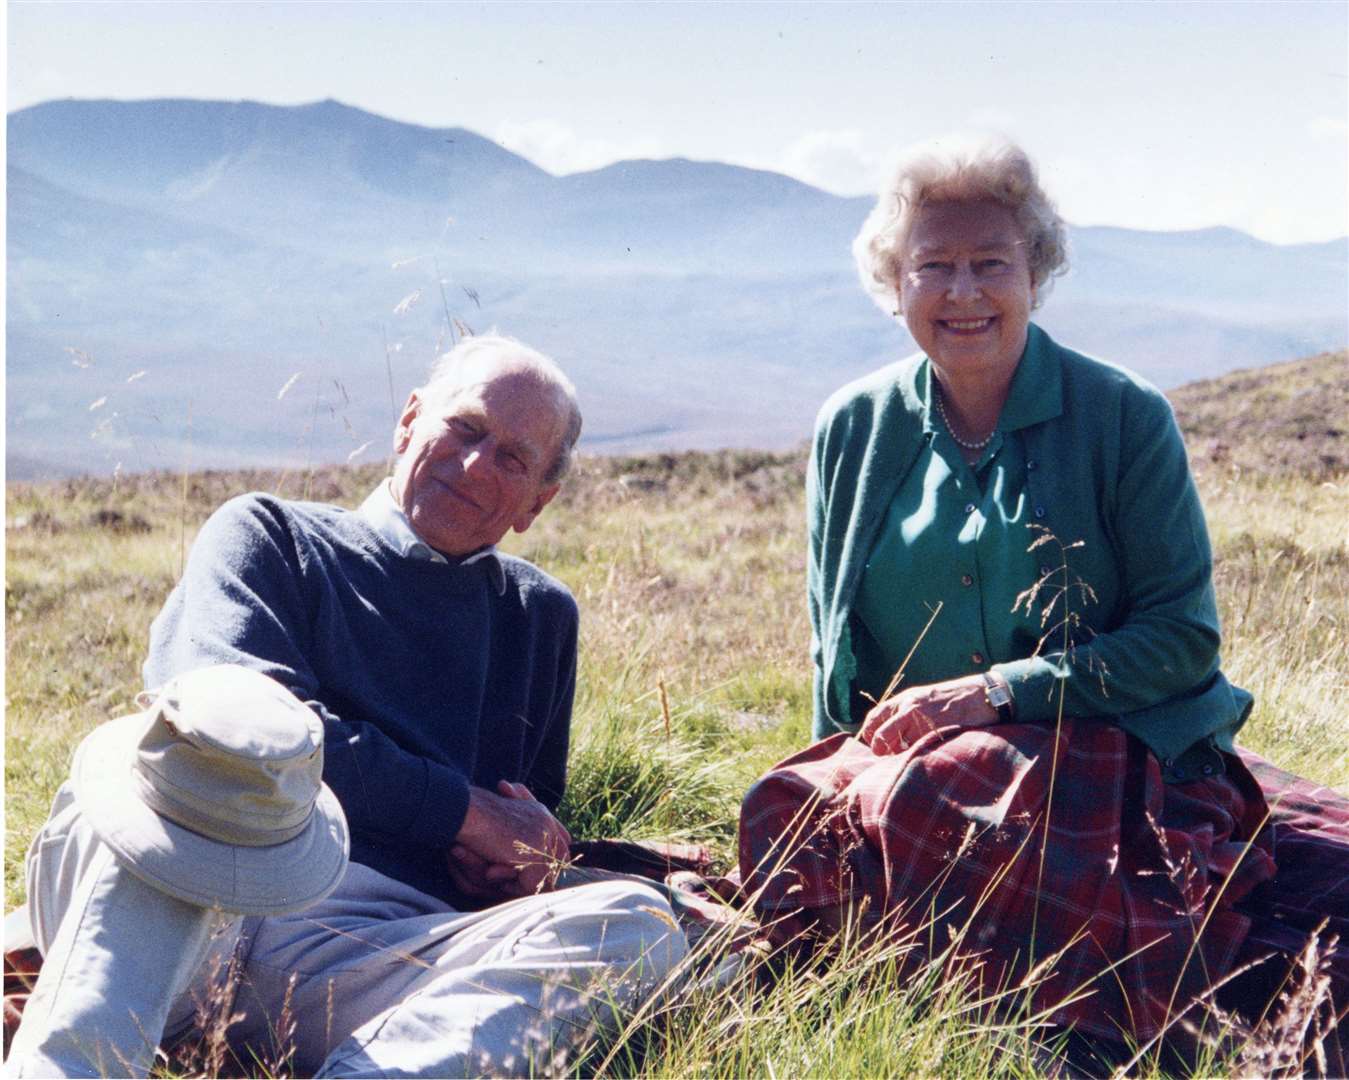 Image released by Buckingham Palace of a personal photograph of the Queen and the Duke of Edinburgh at the top of the Coyles of Muick, taken by The Countess of Wessex in 2003 (The Countess of Wessex/PA)